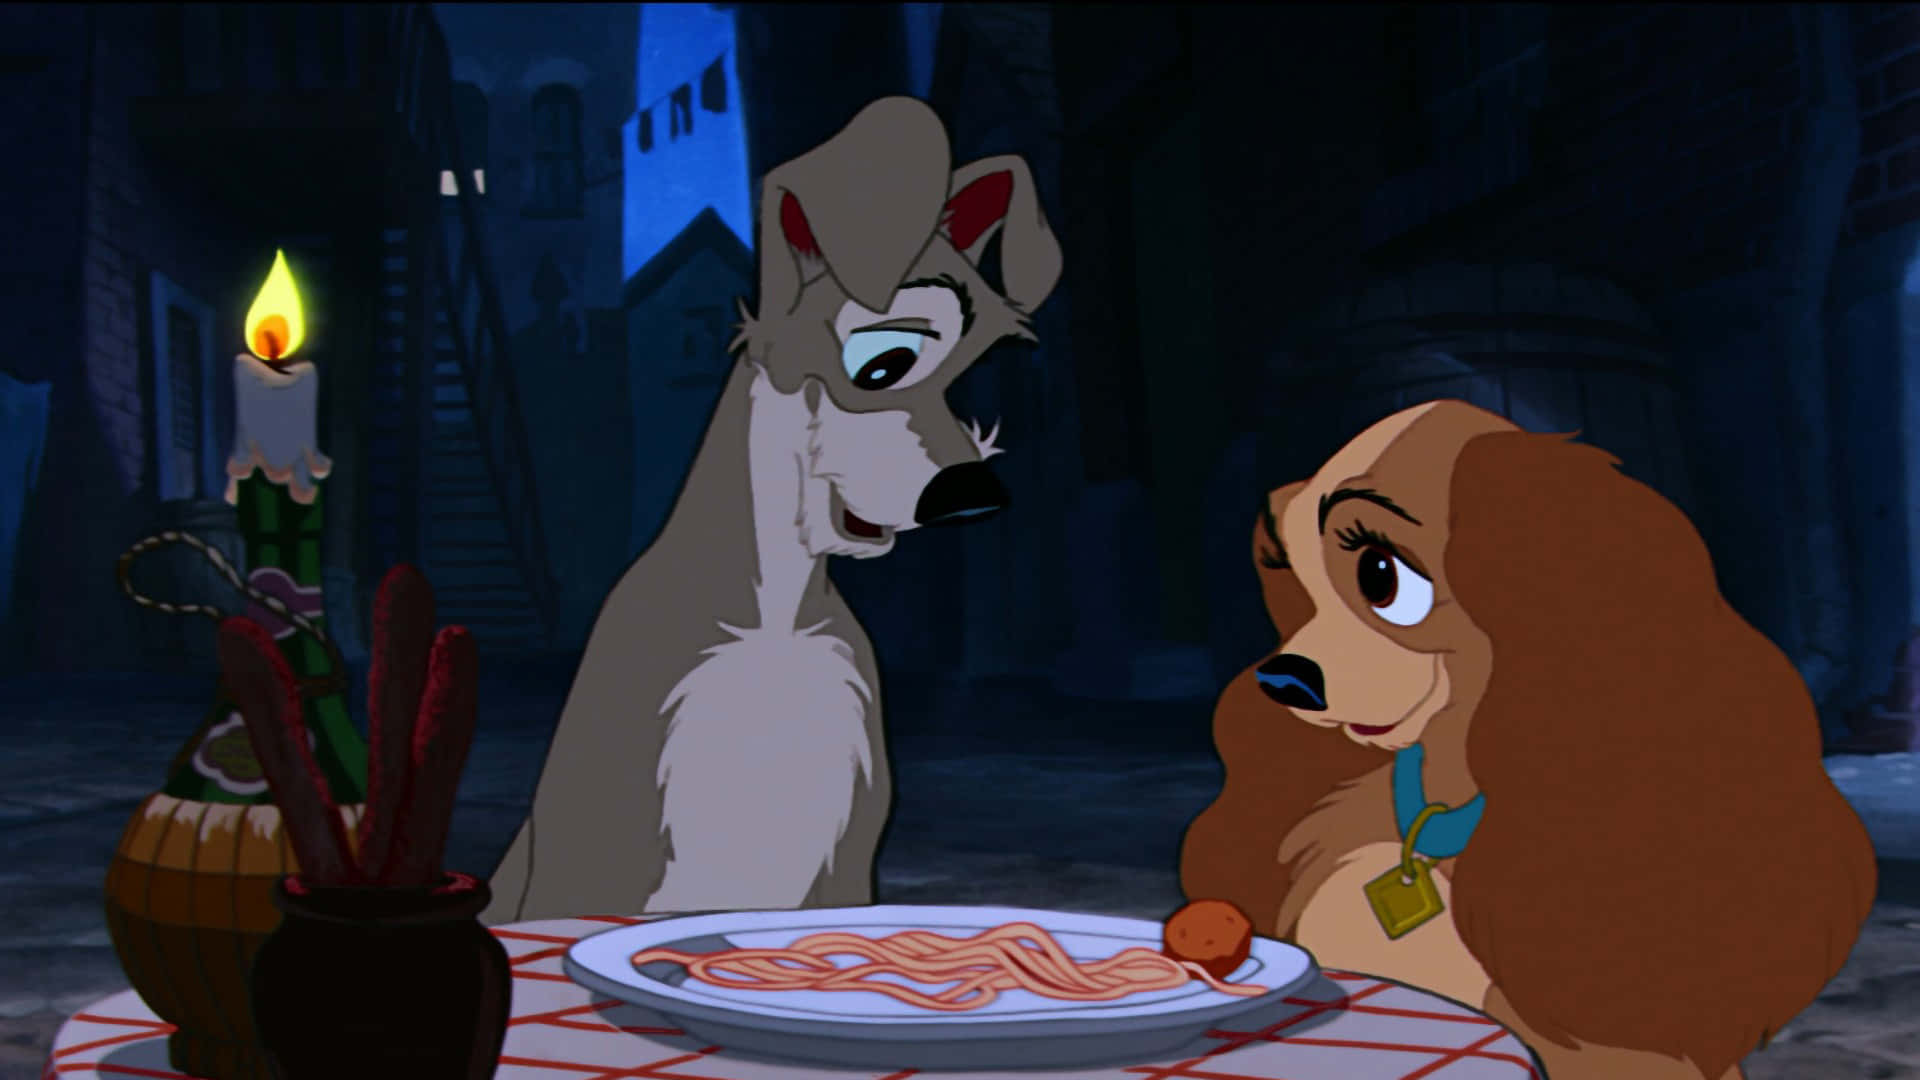 Romantic Spaghetti Dinner - Lady And The Tramp Background